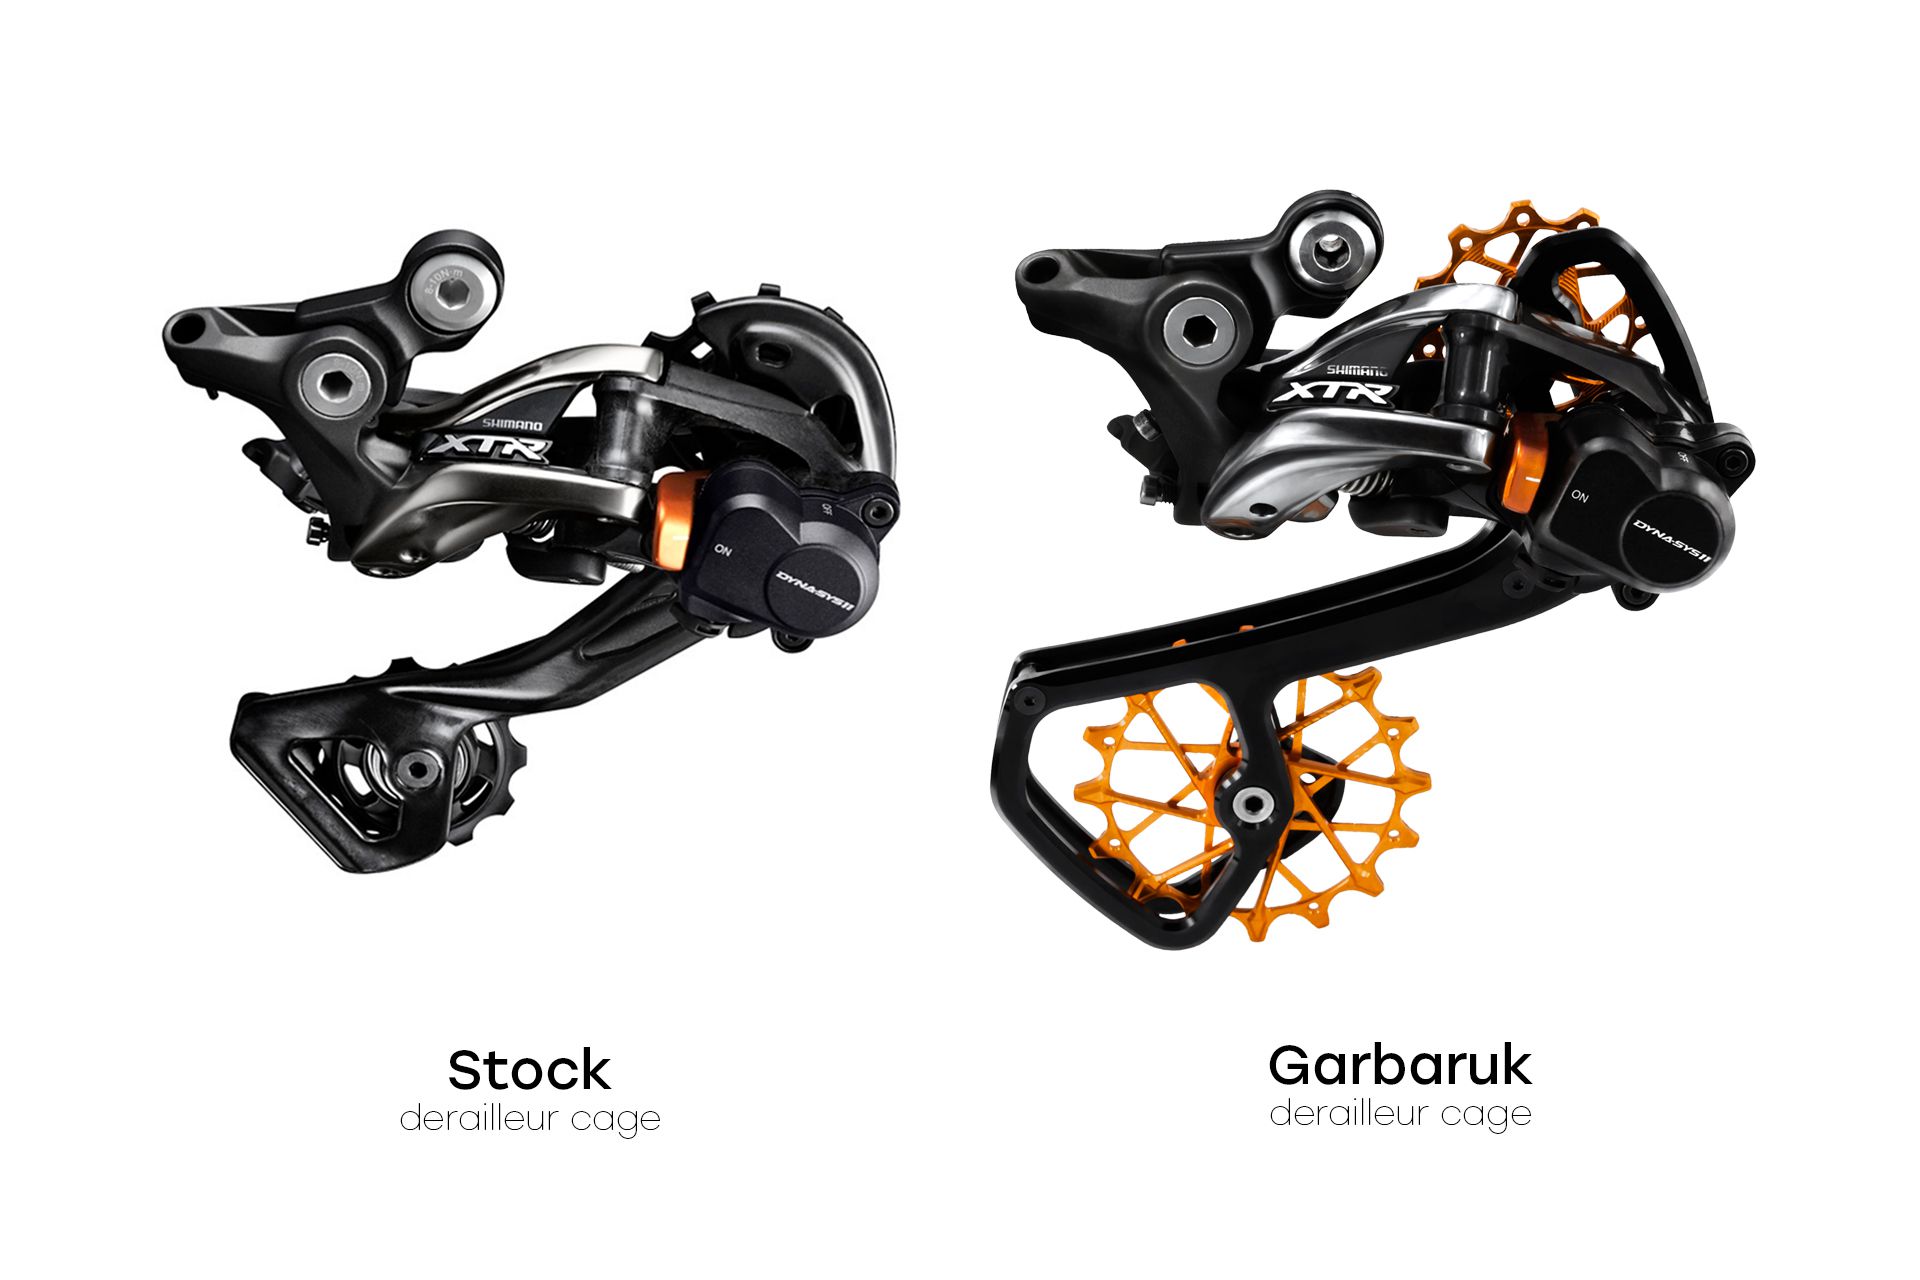 Rear Cages Garbaruk Online Store